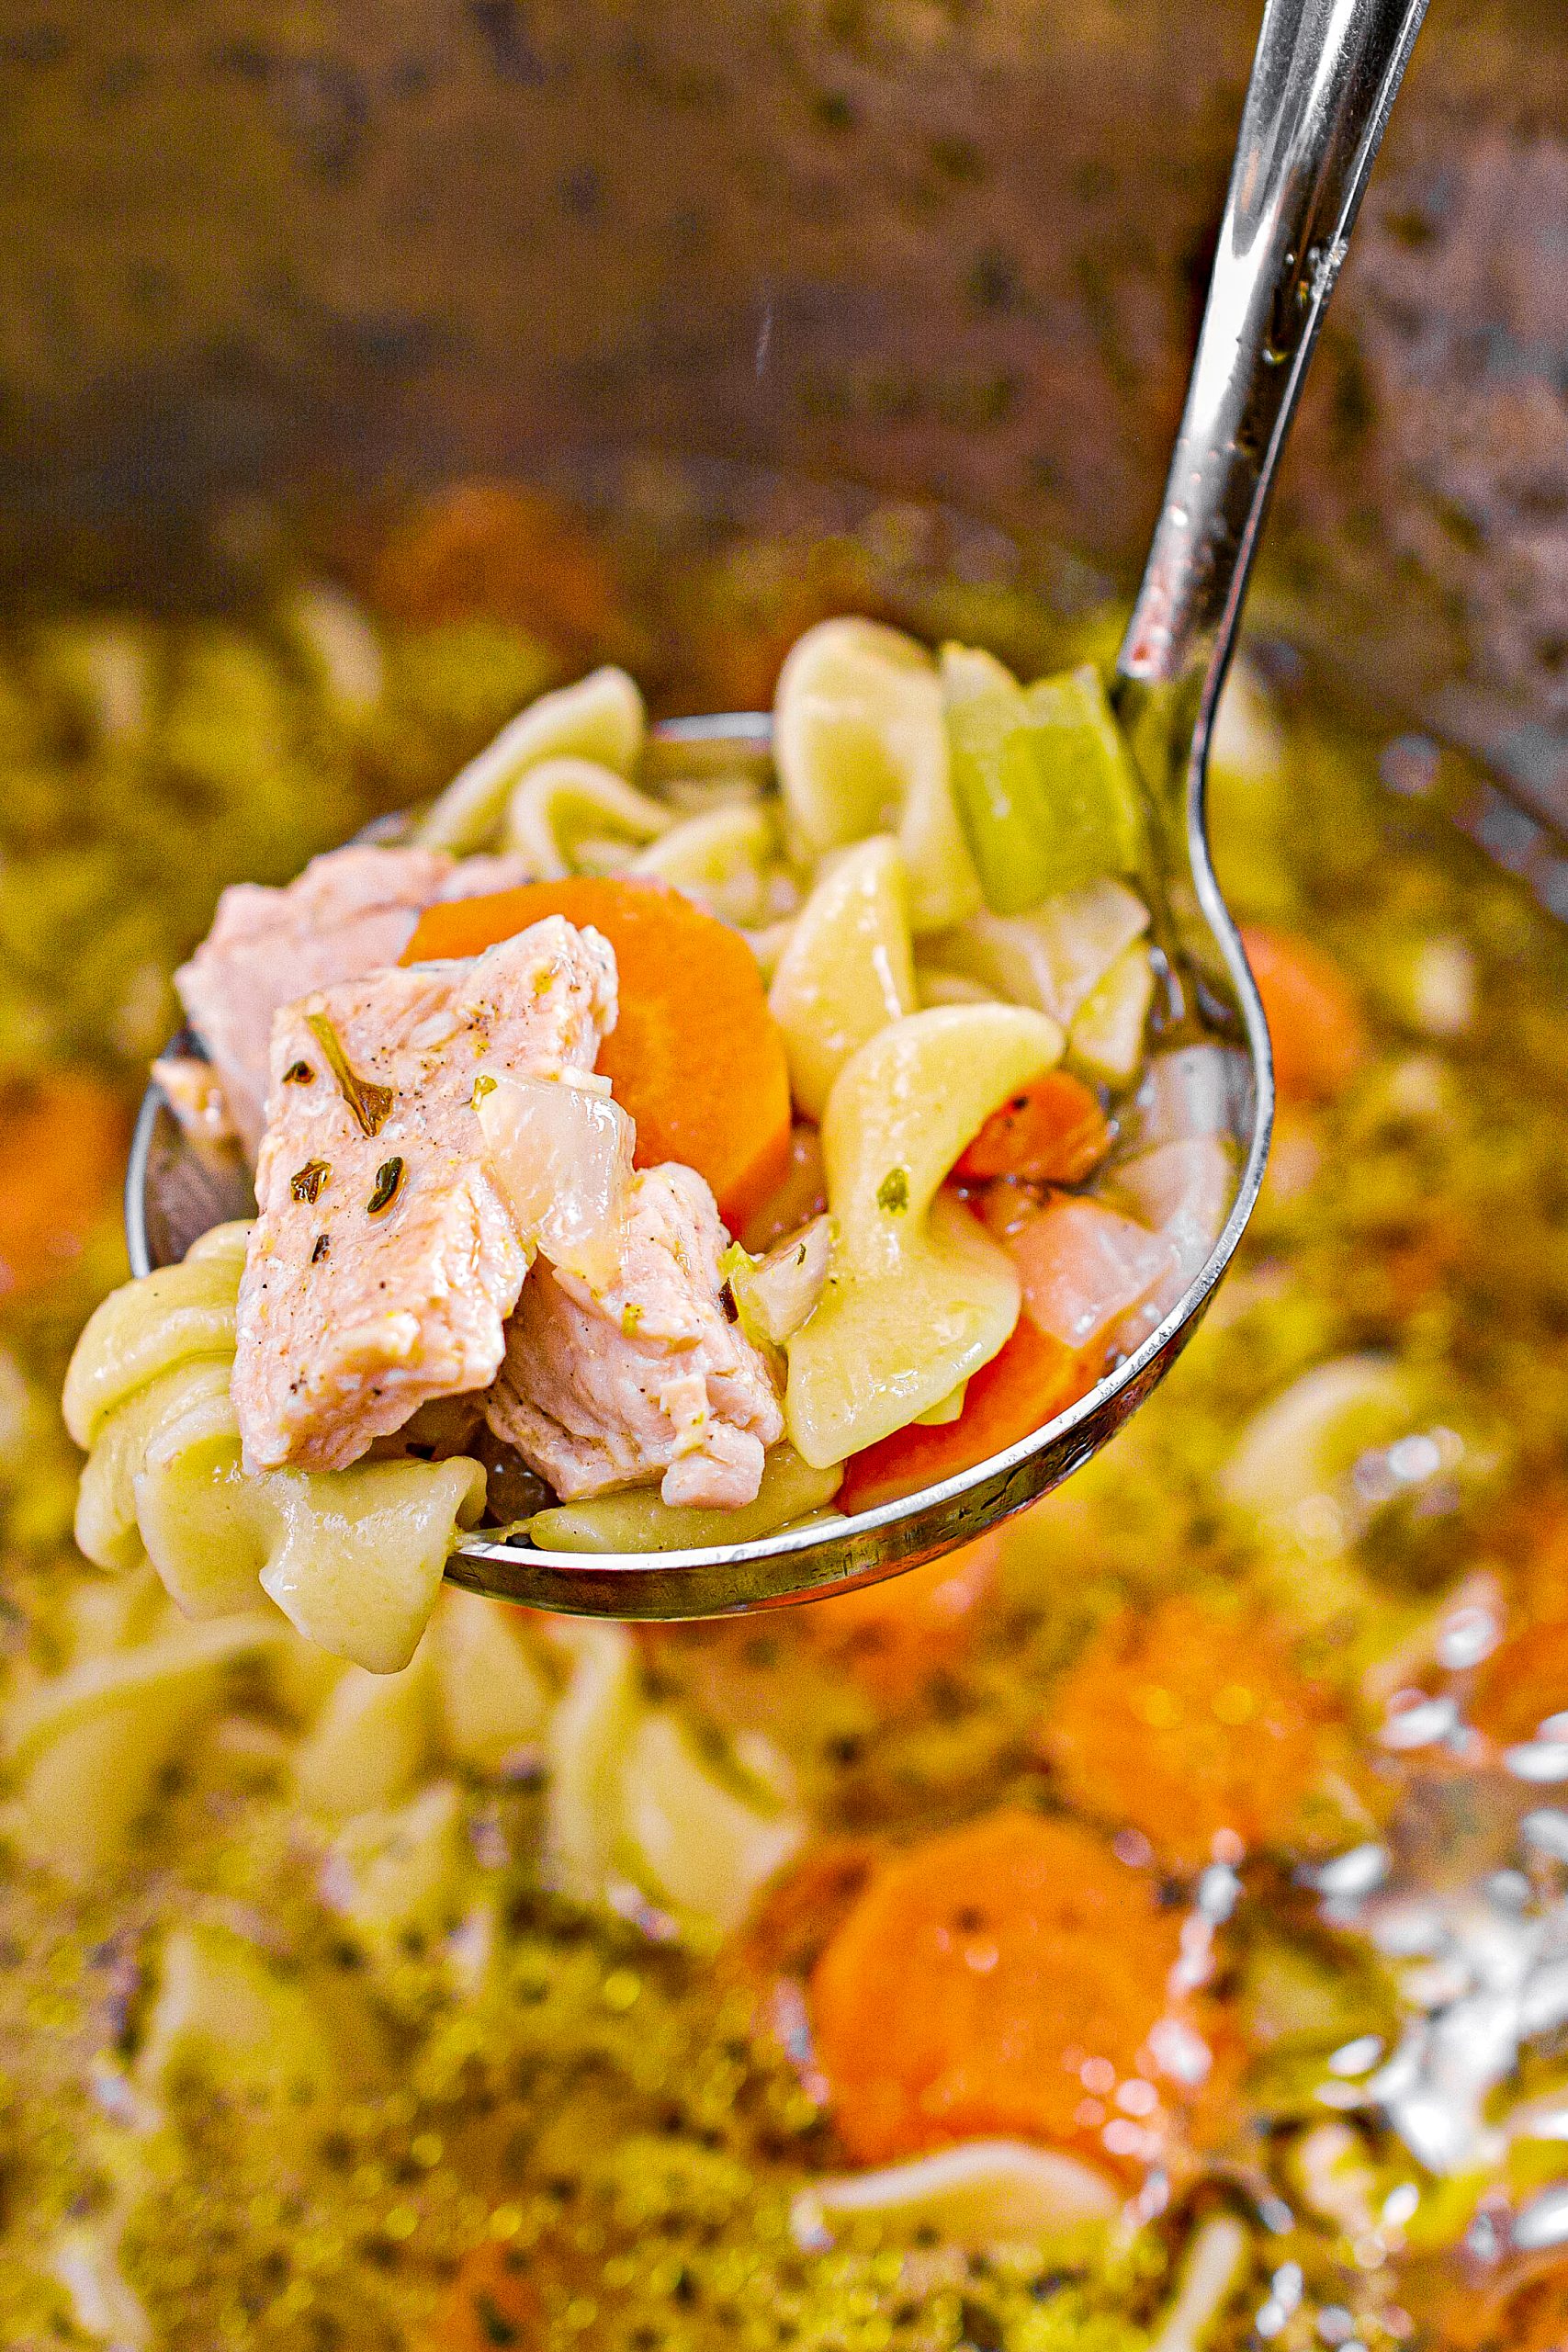 Pressure Cooker Hearty Chicken Noodle Soup